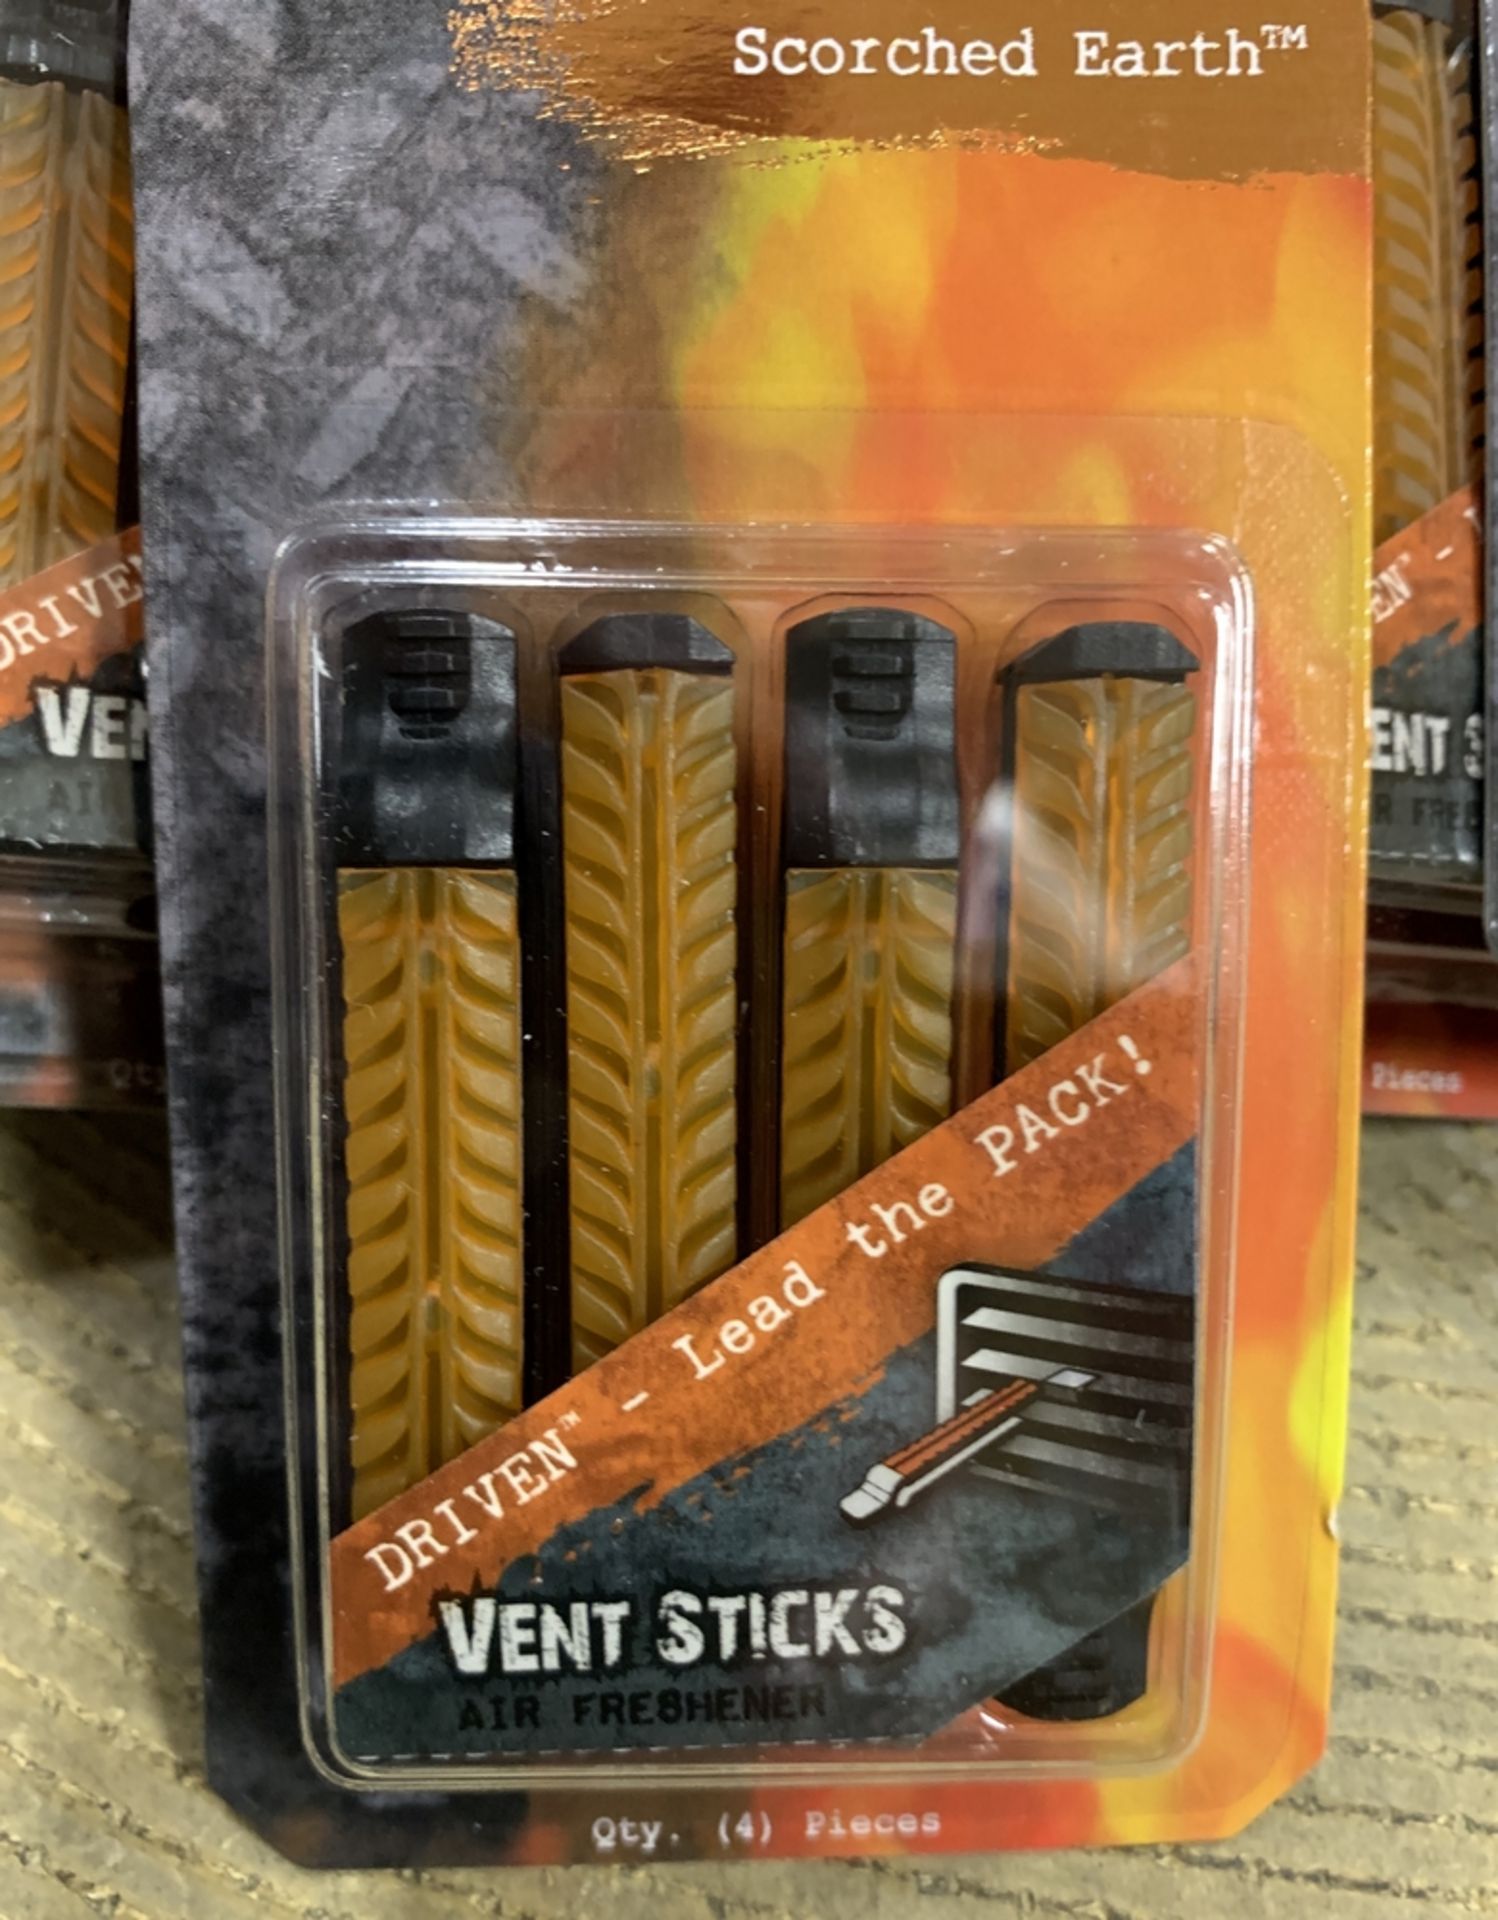 180 PACKS OF CAR VENT SCENTED STICKS (8 STICKS PER PACKAGE) DRIVEN BY REFRESH 'SCORCHED EARTH". - Image 3 of 5